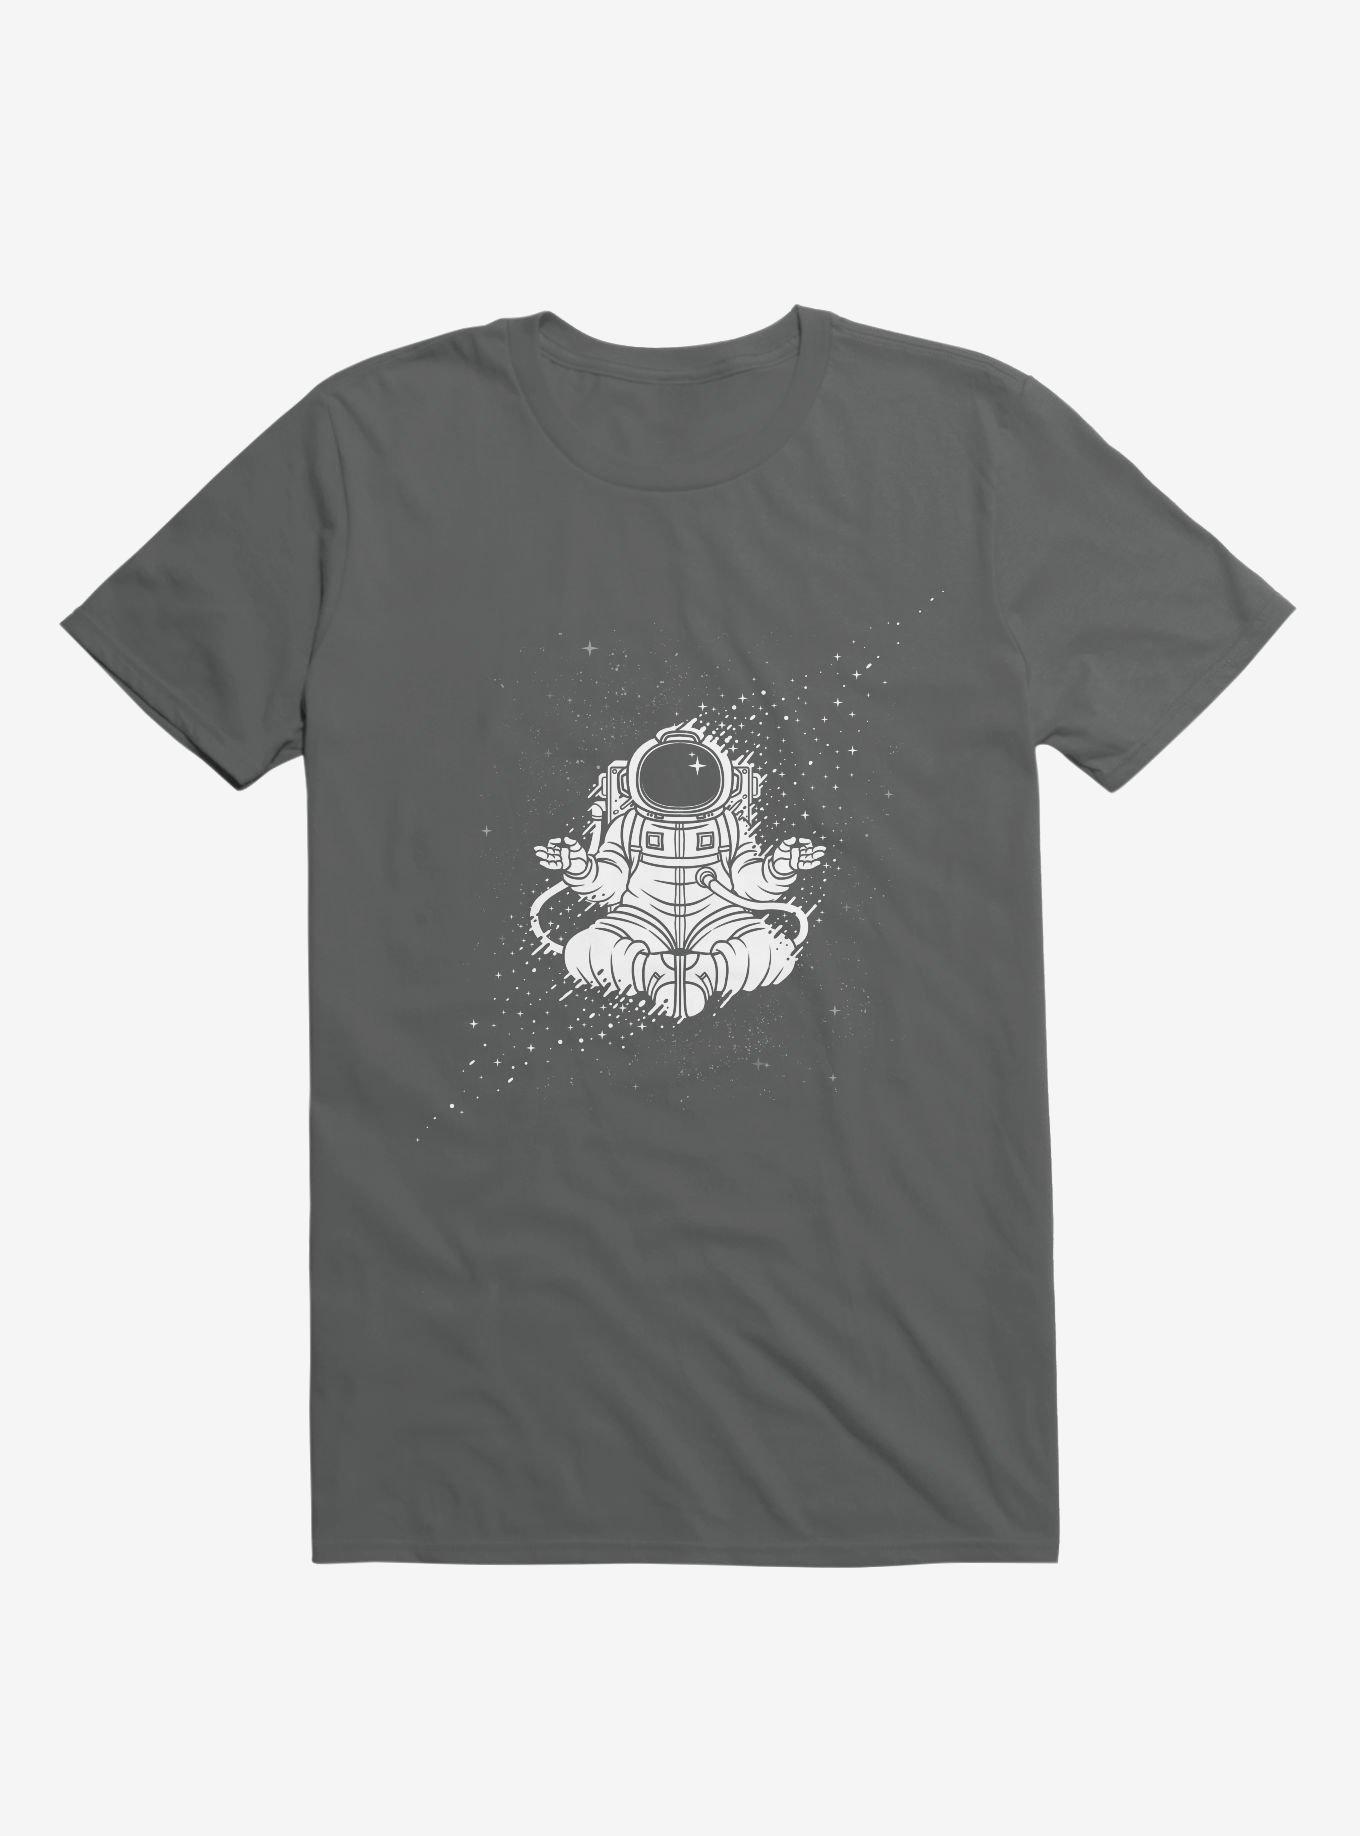 Becoming One With The Universe Astronaut Charcoal Grey T-Shirt